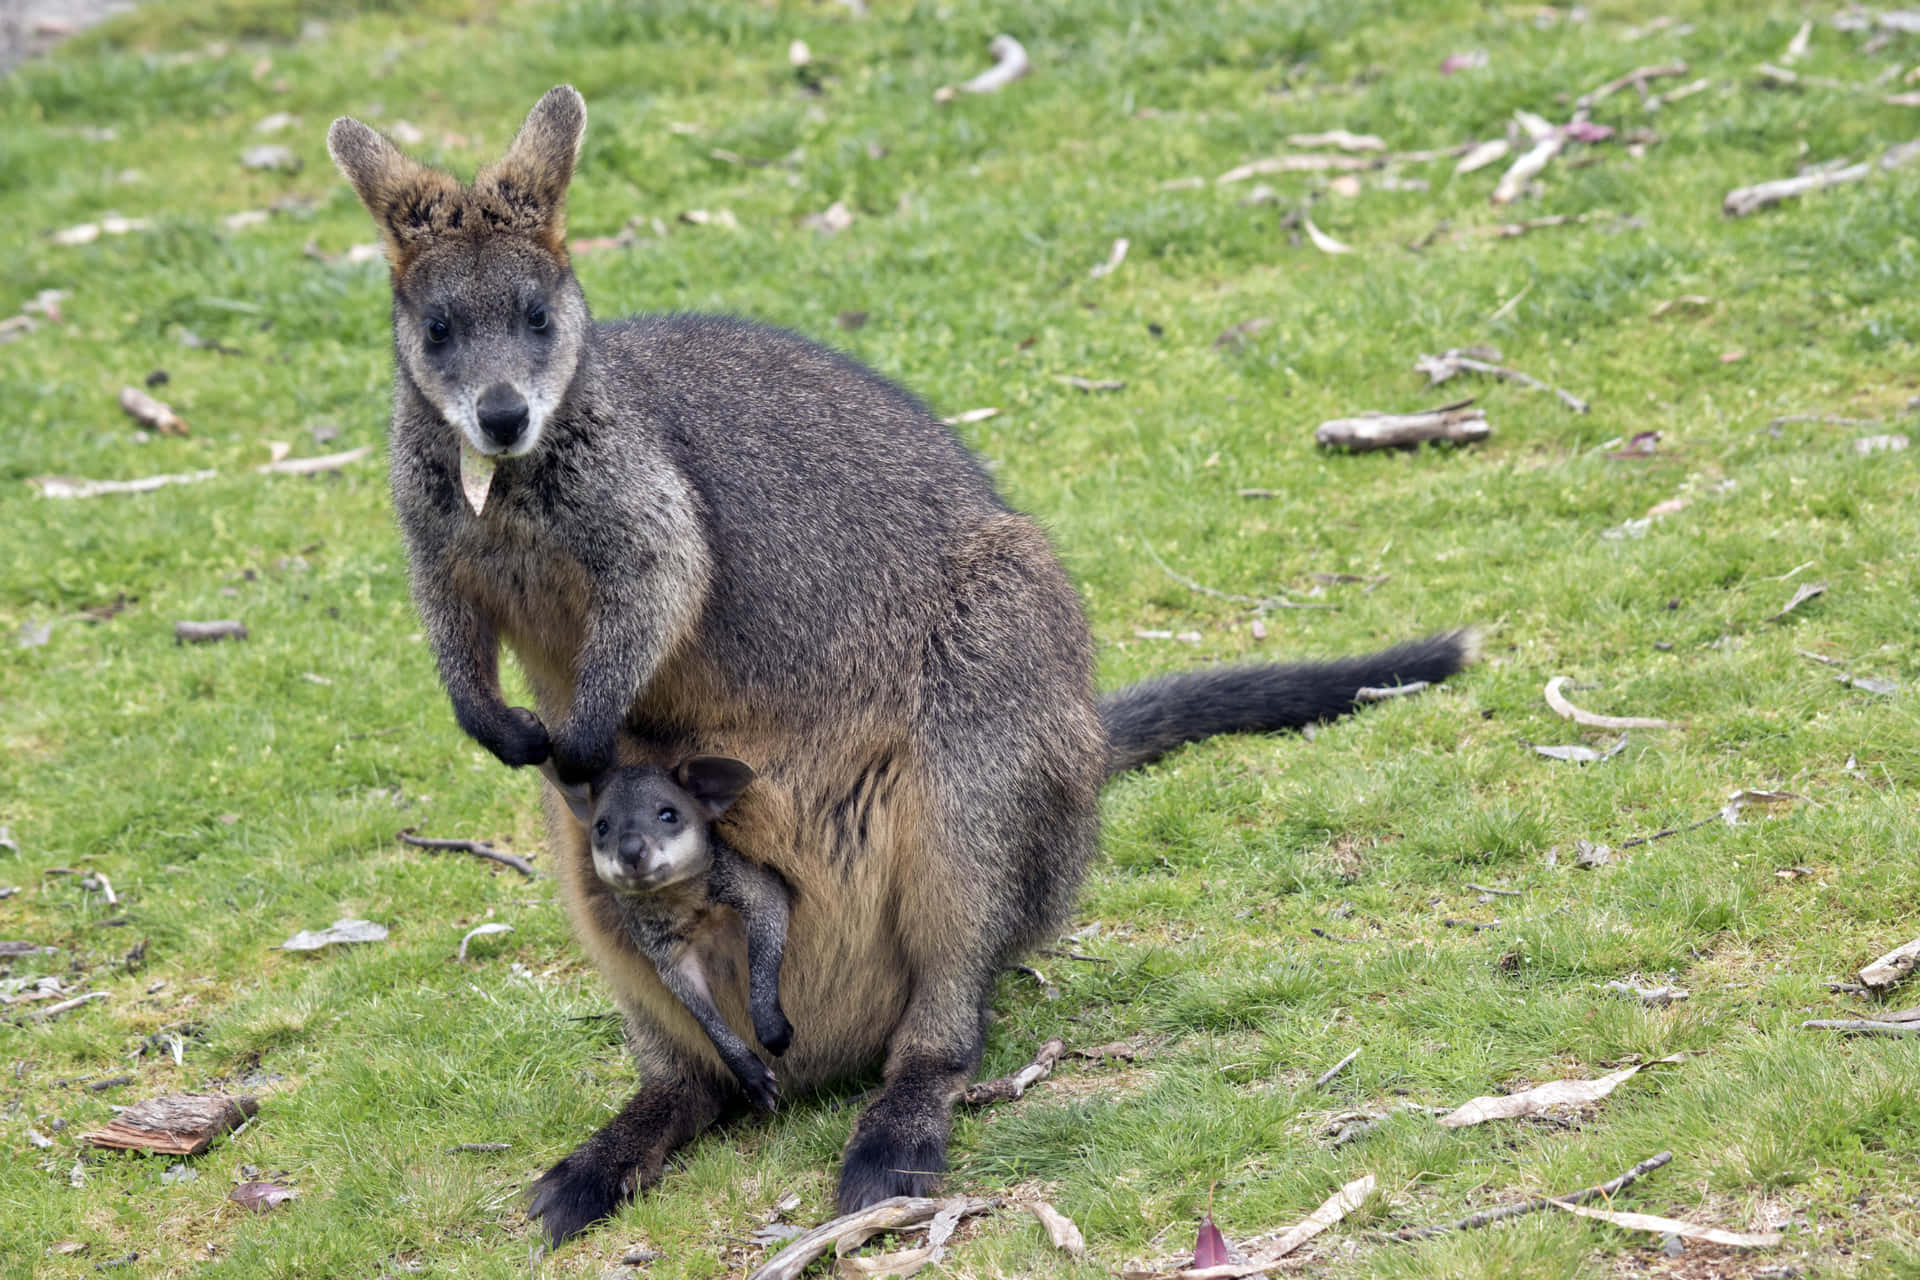 Wallaby With Joey In Pouch Wallpaper